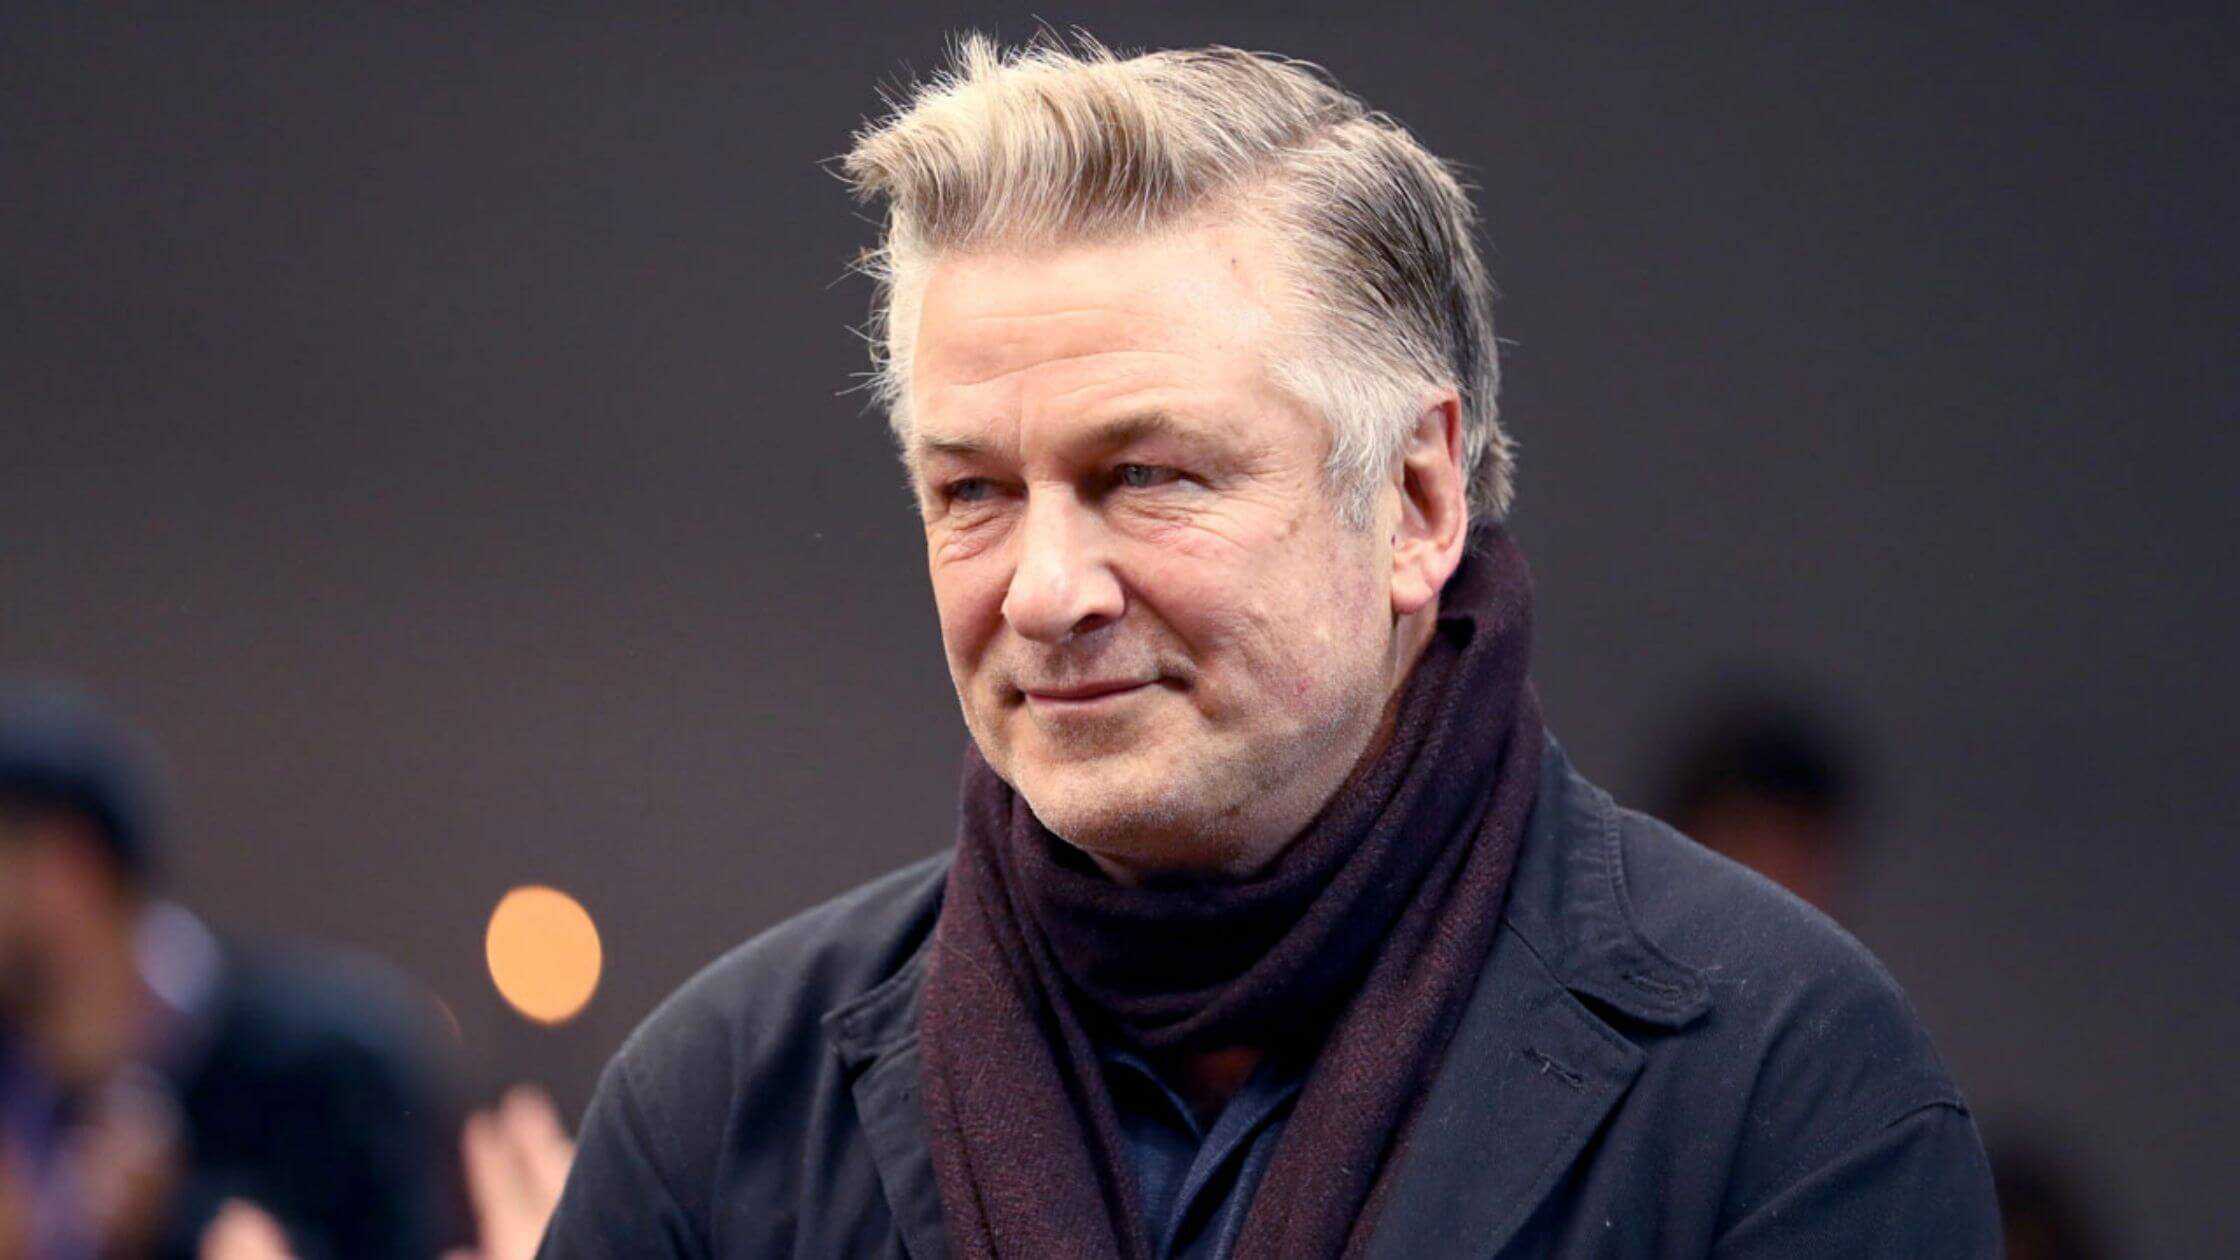 Exoneration For Alec Baldwin, According To His Lawyer, From The 'Rust' OSHA Report